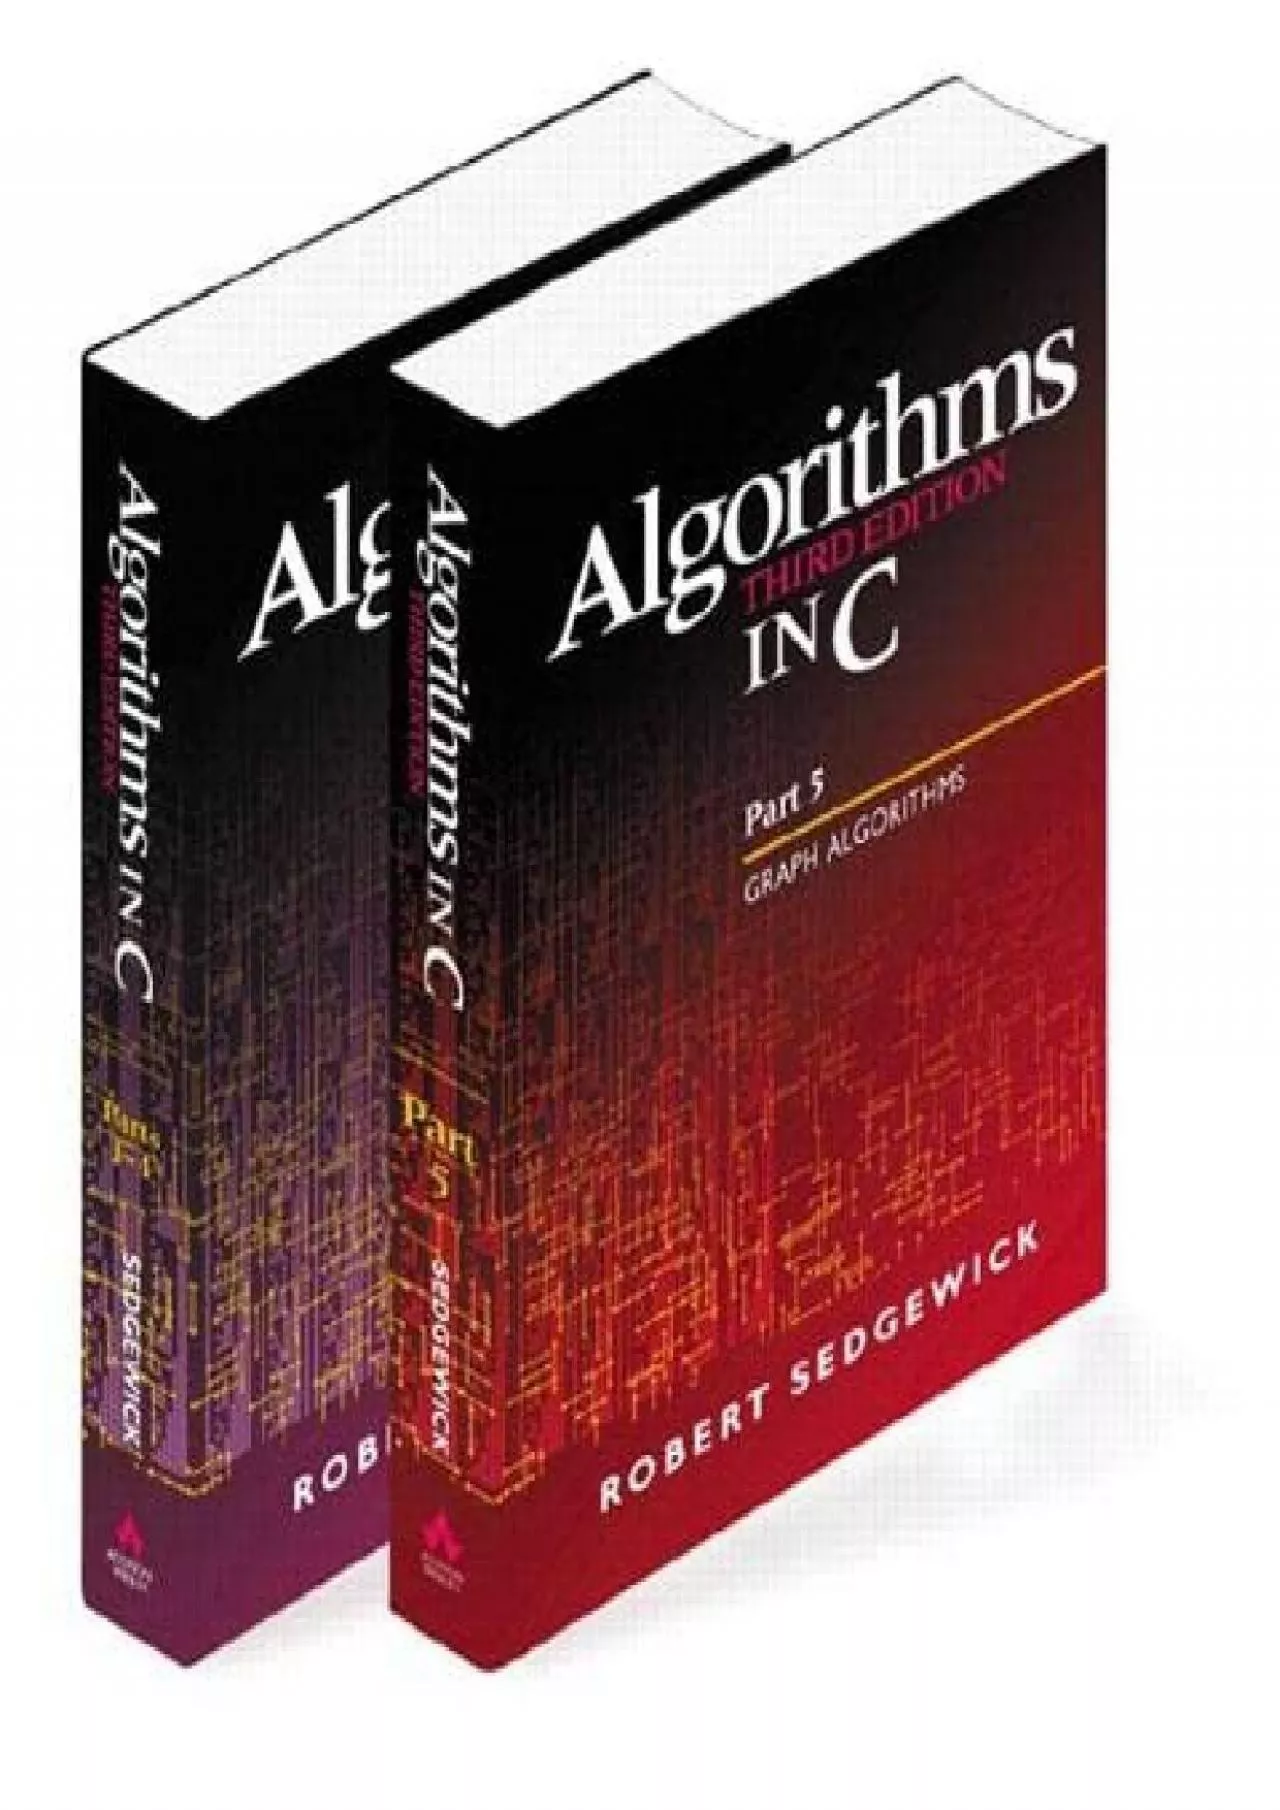 [READING BOOK]-Algorithms in C, Parts 1-5: Fundamentals, Data Structures, Sorting, Searching,